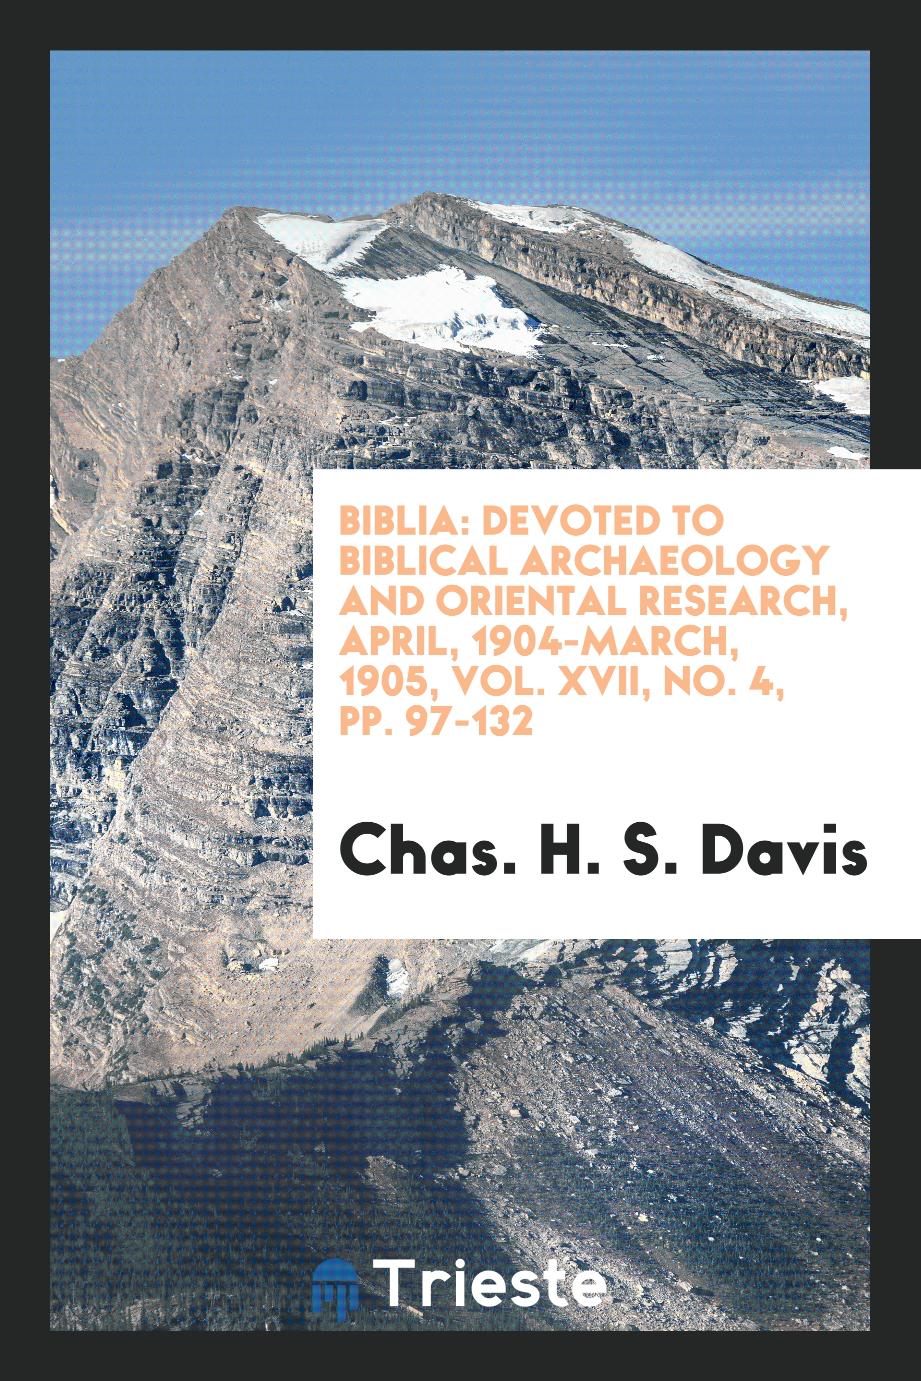 Biblia: devoted to biblical archaeology and oriental research, april, 1904-march, 1905, Vol. XVII, No. 4, pp. 97-132